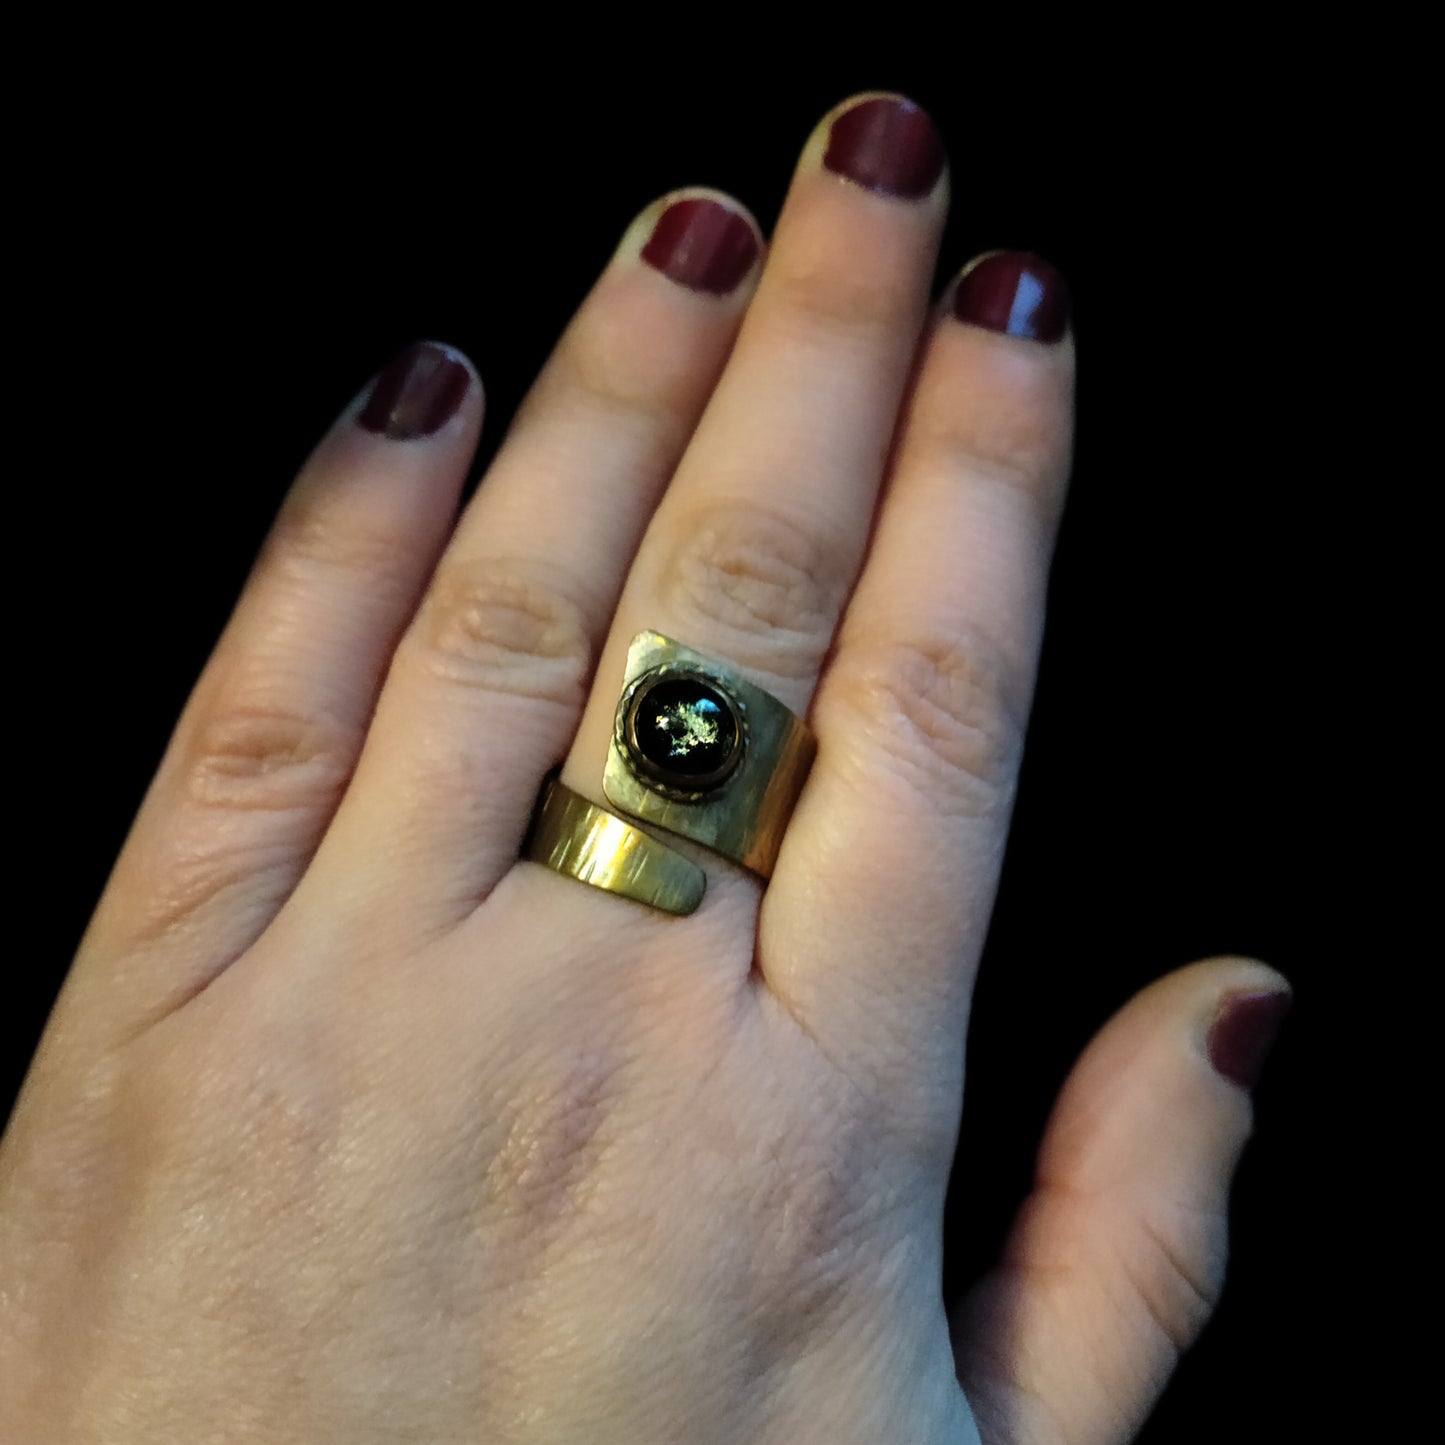 LEIA&CO antique wrap ring with cat's eye dichroic glass size 8 US